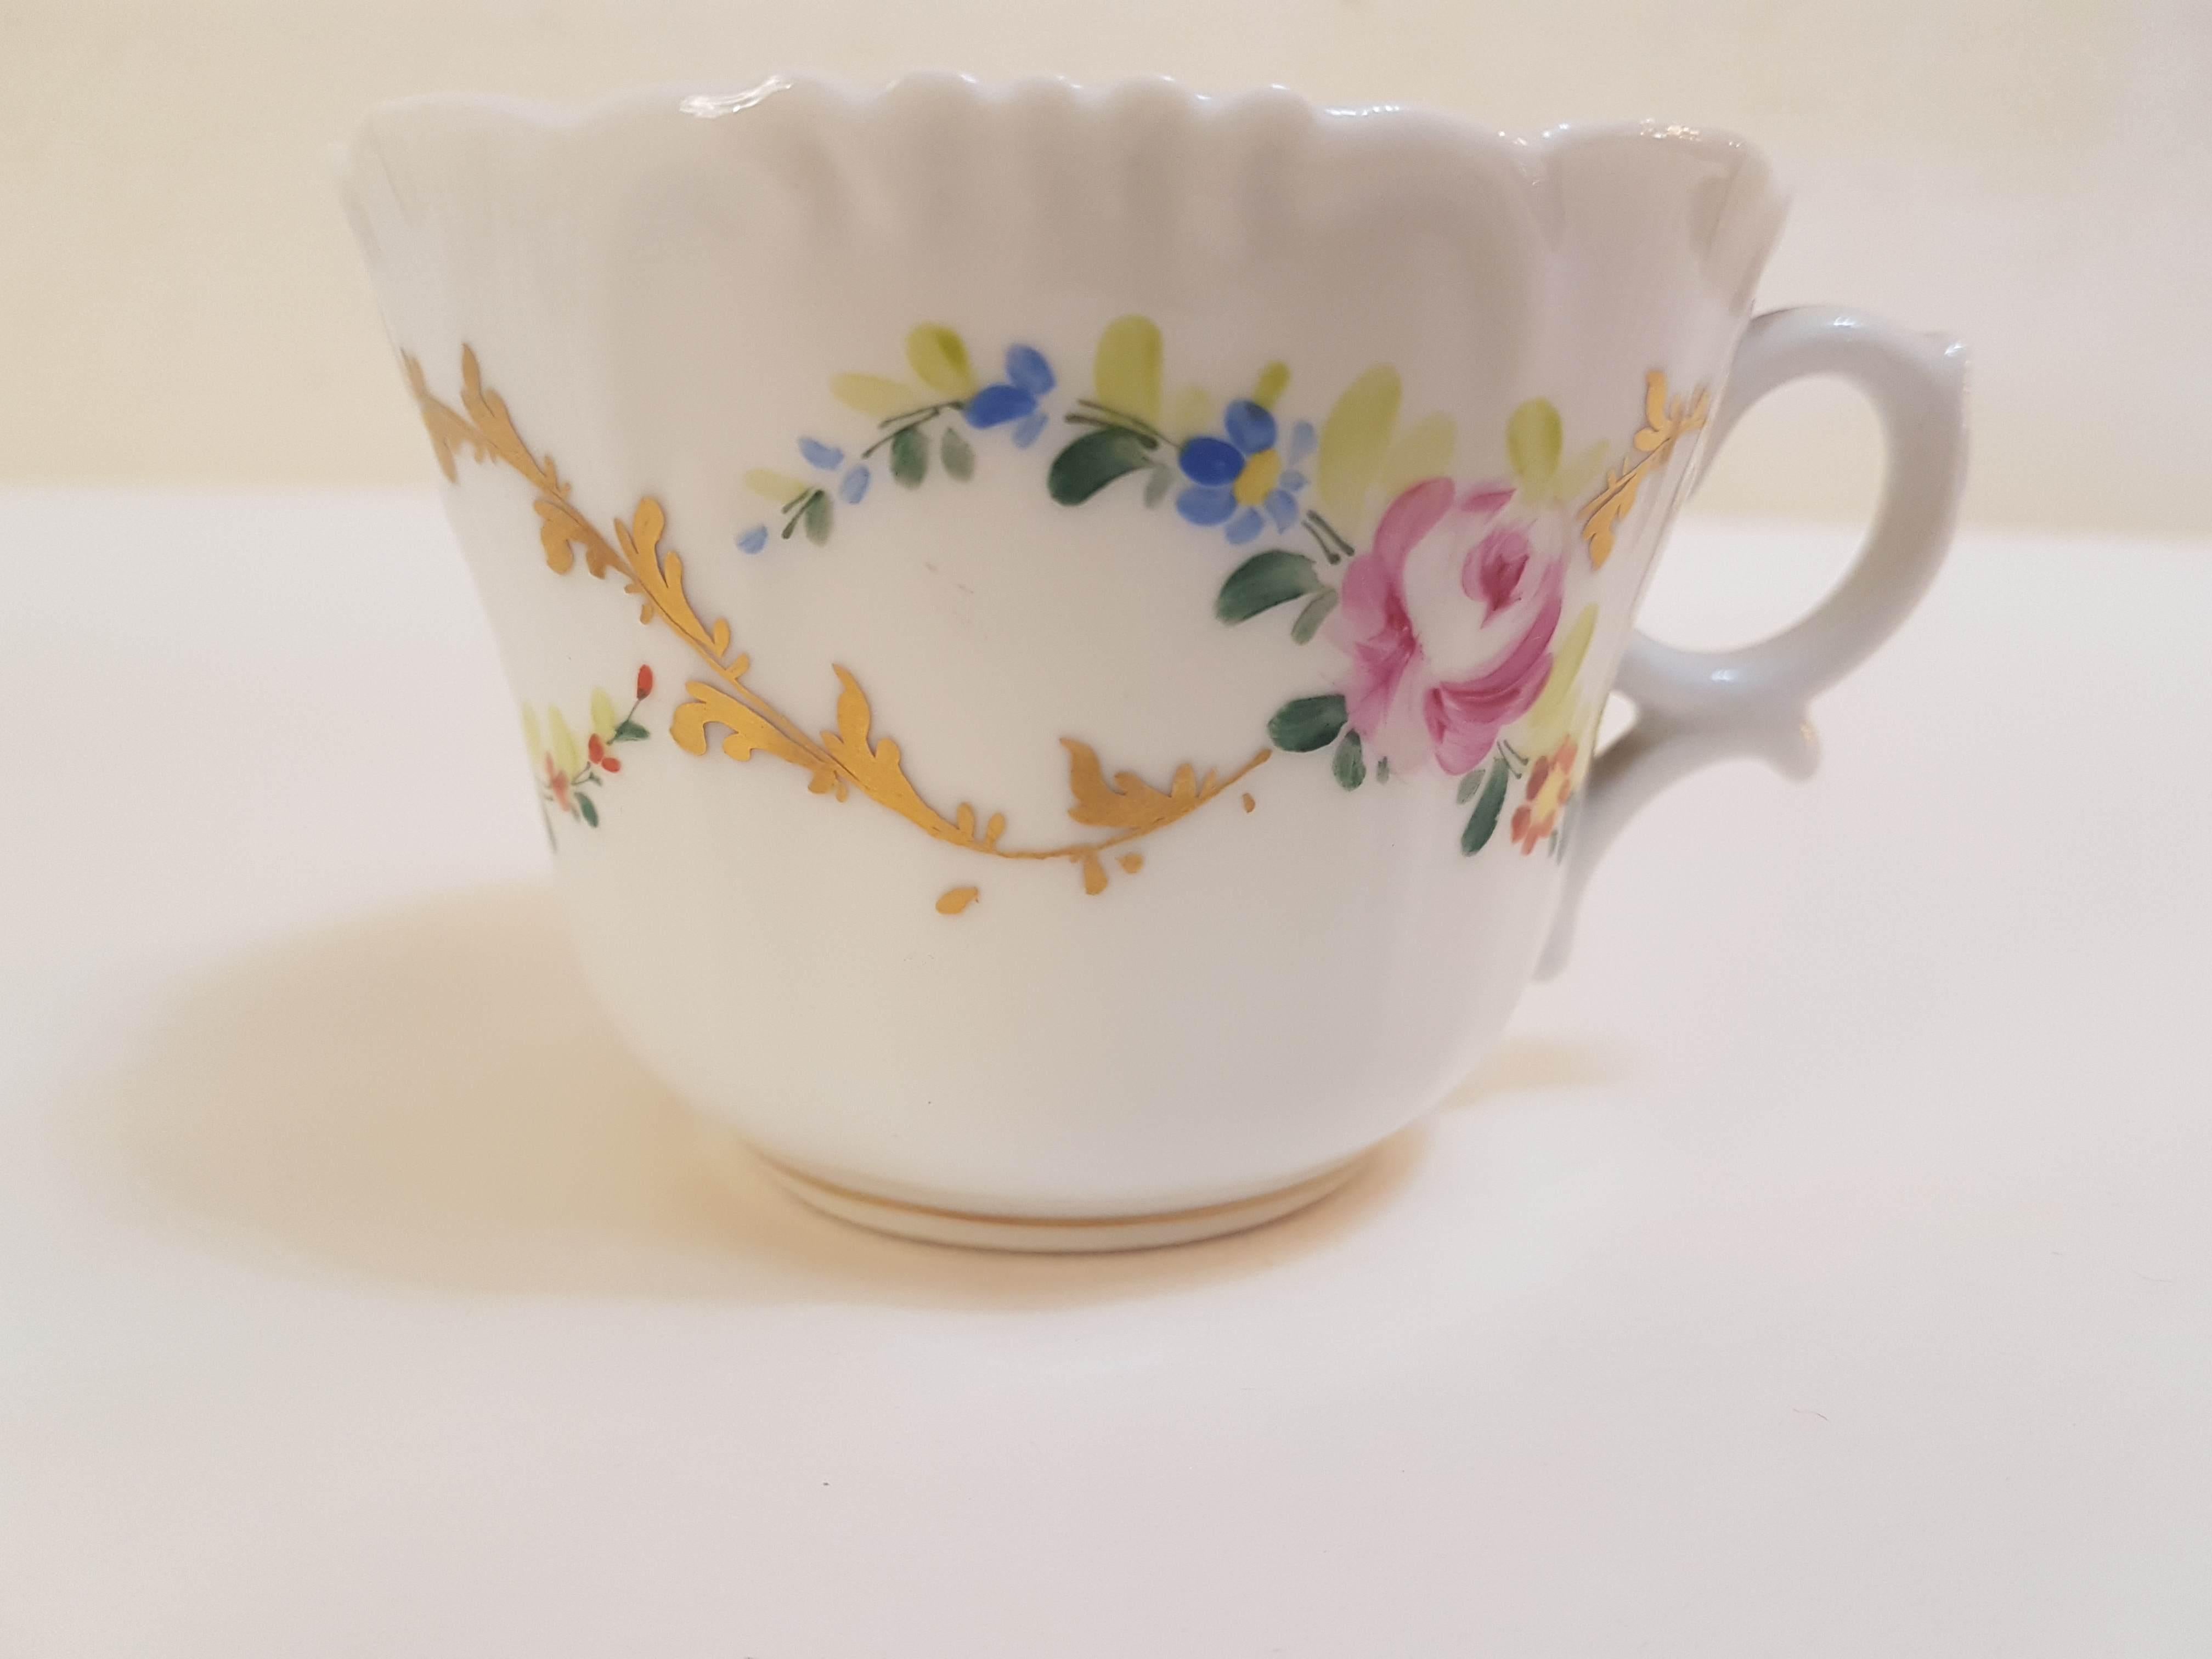 20th Century Hand-Painted Vista Alegre Porcelain Collectible Tea Cup and Saucer 1